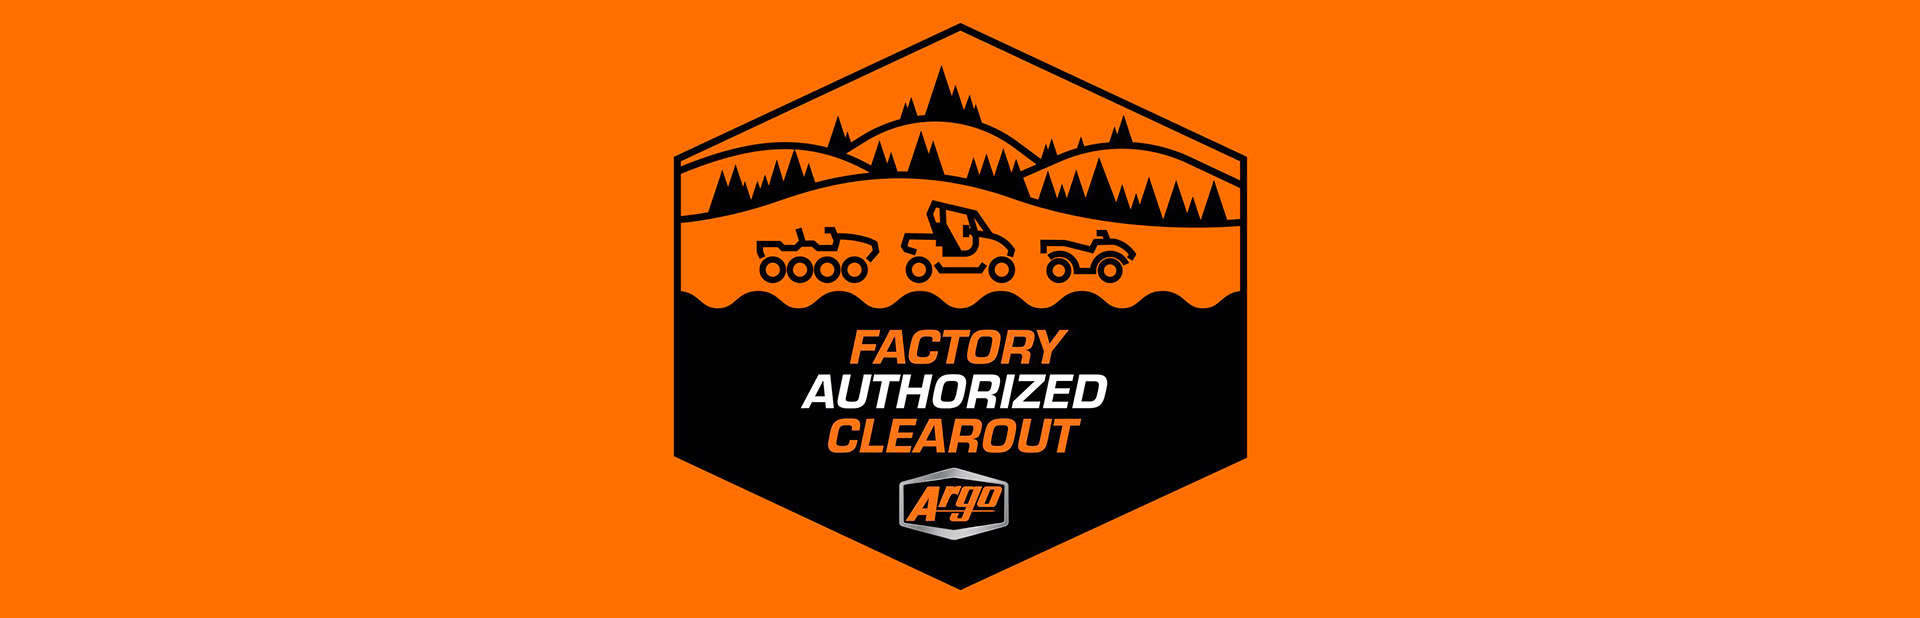 FACTORY AUTHORIZED CLEAROUT